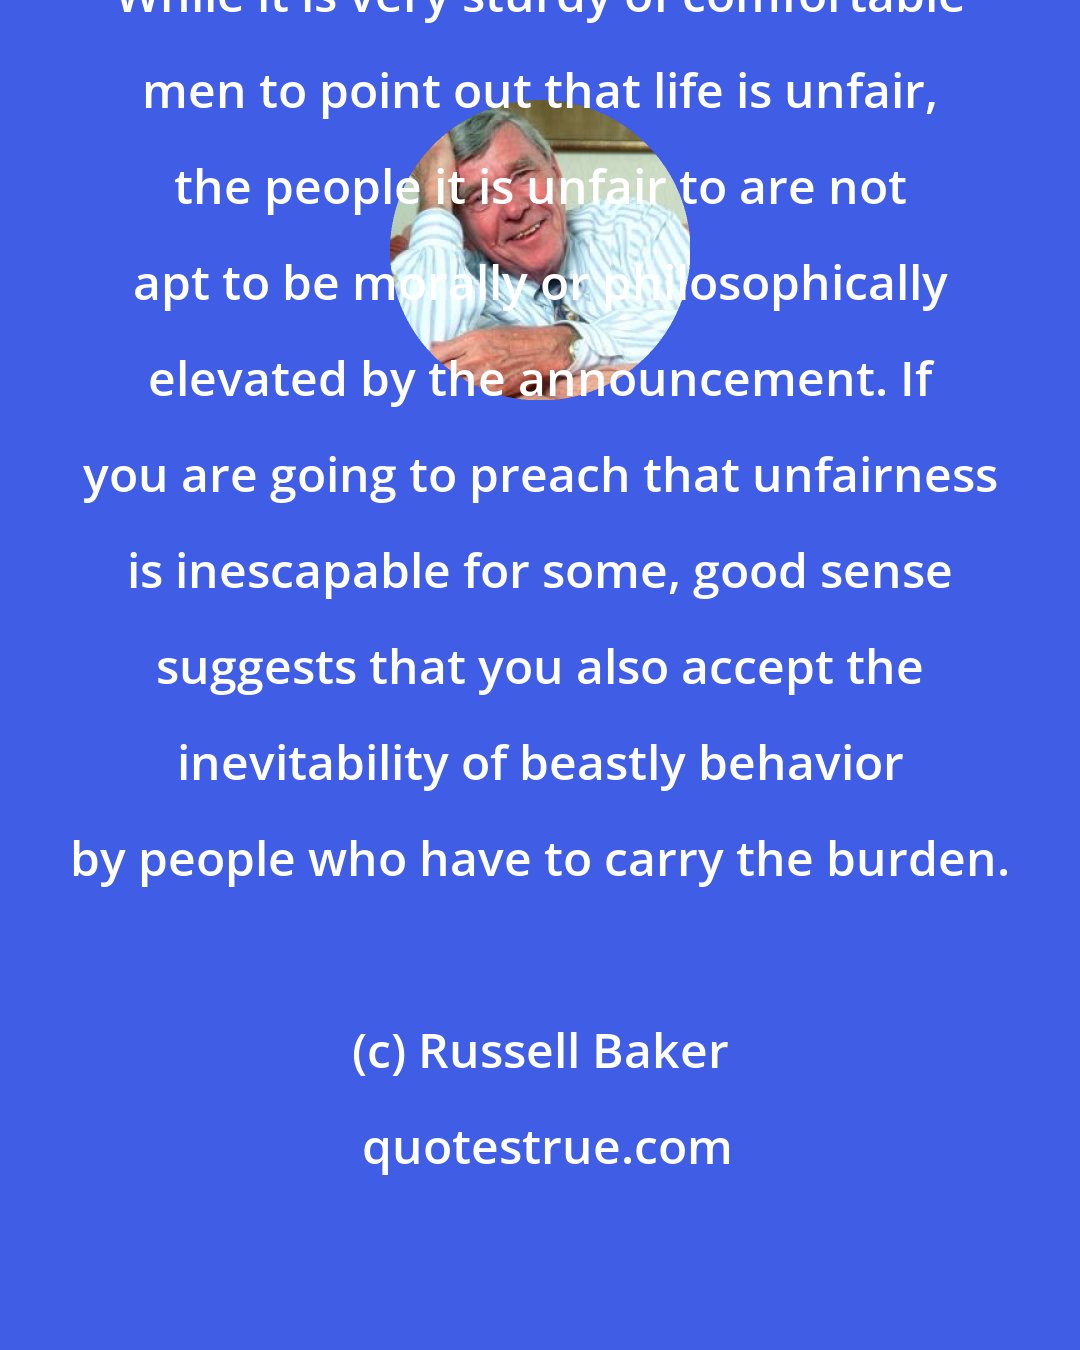 Russell Baker: While it is very sturdy of comfortable men to point out that life is unfair, the people it is unfair to are not apt to be morally or philosophically elevated by the announcement. If you are going to preach that unfairness is inescapable for some, good sense suggests that you also accept the inevitability of beastly behavior by people who have to carry the burden.